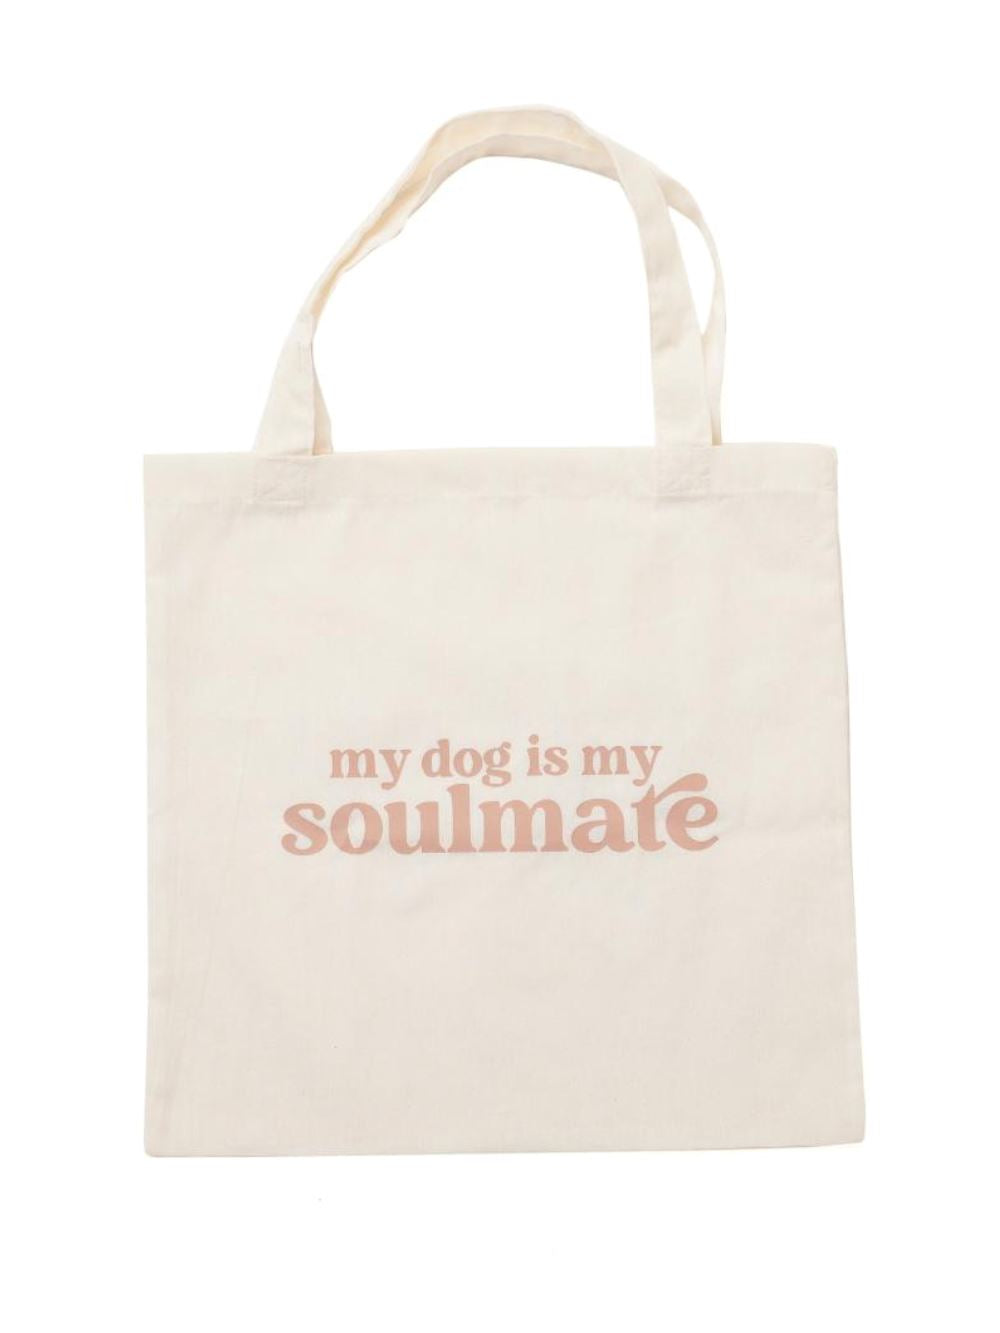 My Dog is My Soulmate Canvas Tote Bag - Sydney So Sweet